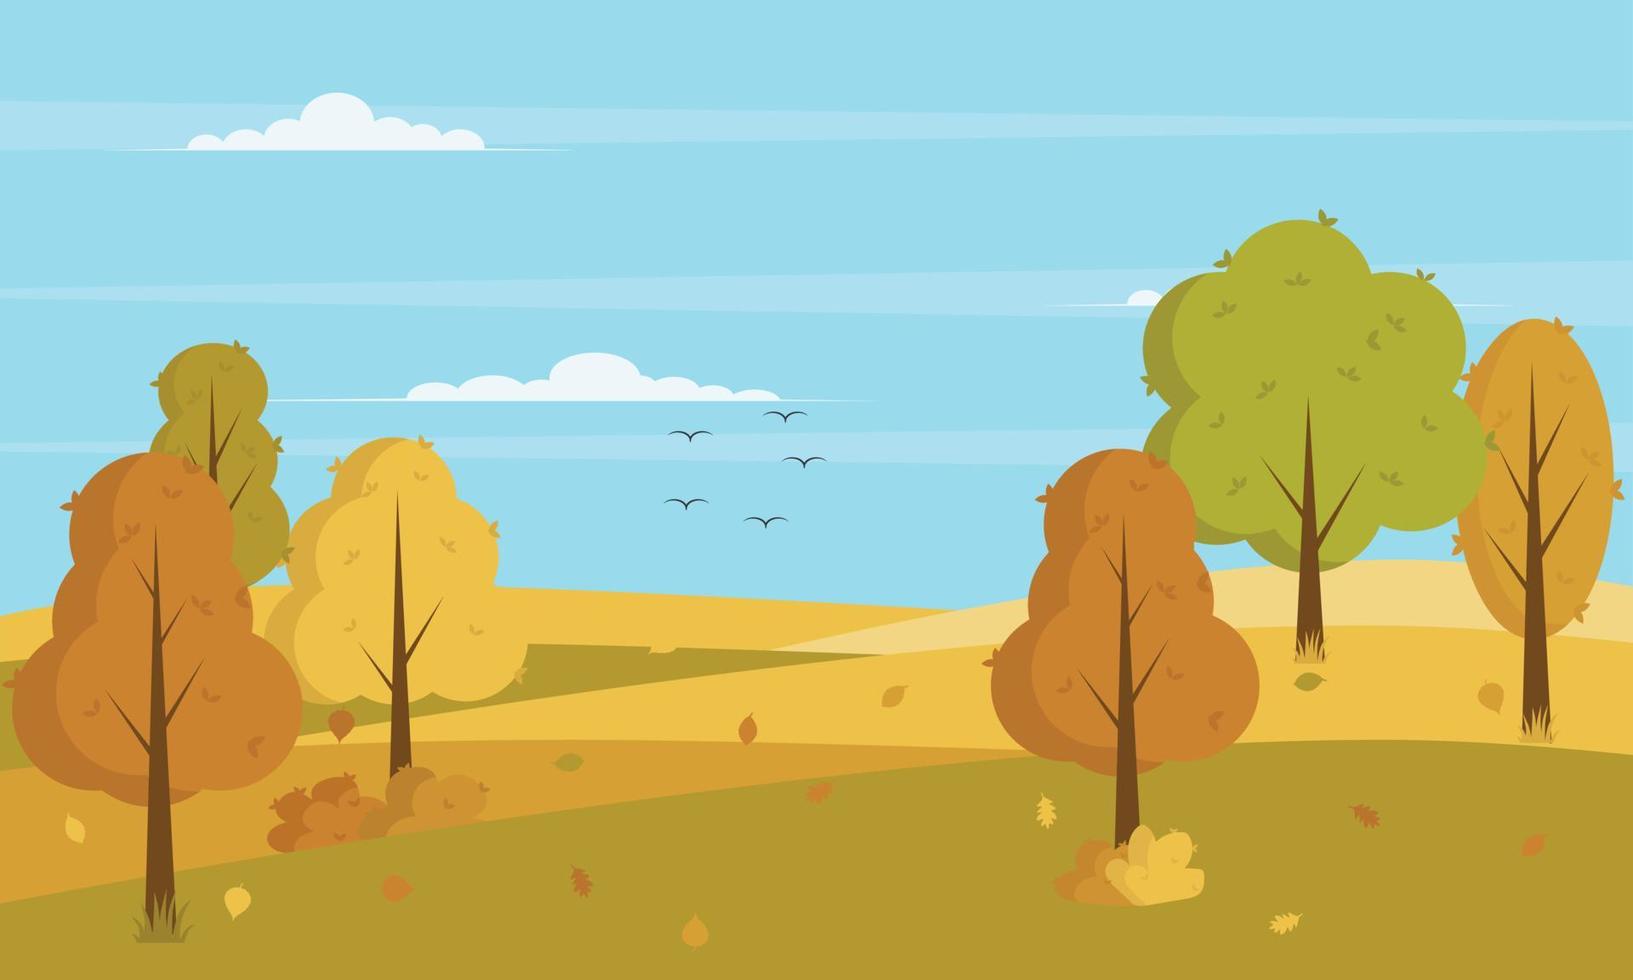 Panoramic of Countryside landscape in autumn with fallen leaves on the grass, Vector illustration of horizontal banner of autumn landscape mountains and maple trees with yellow foliage in fall season.